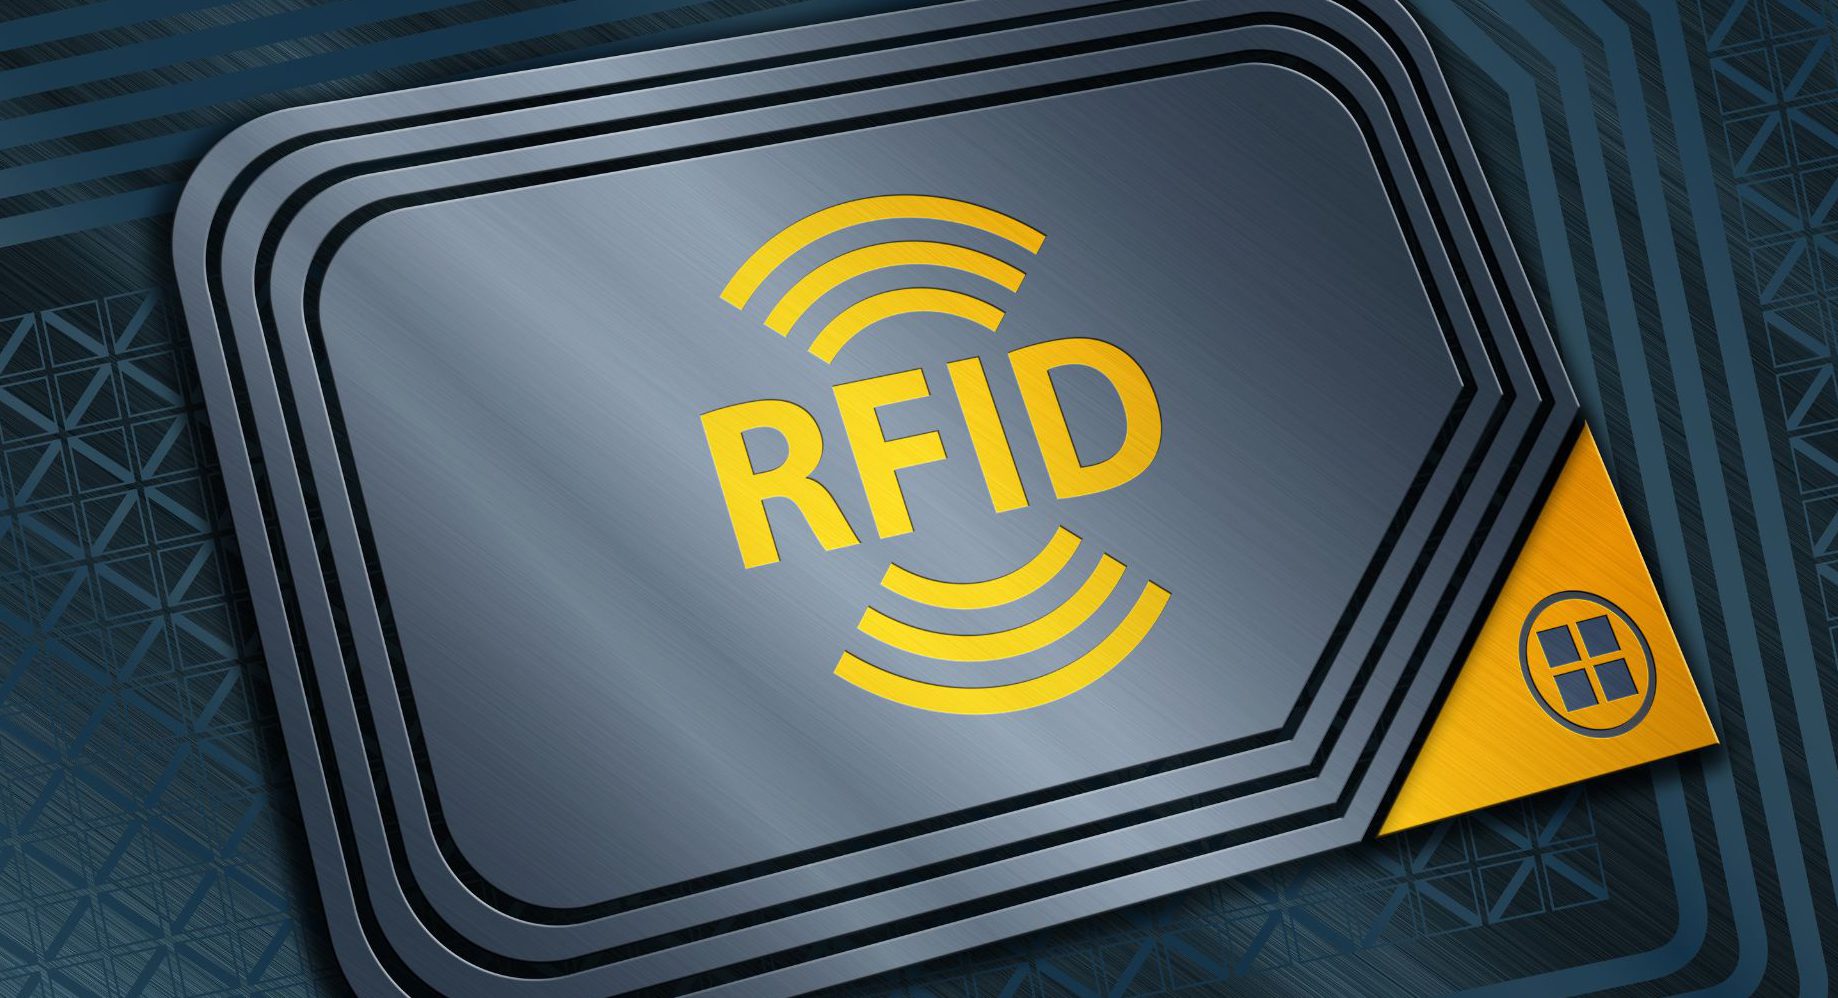 Radio-Frequency Identification (RFID) Tags Market Report